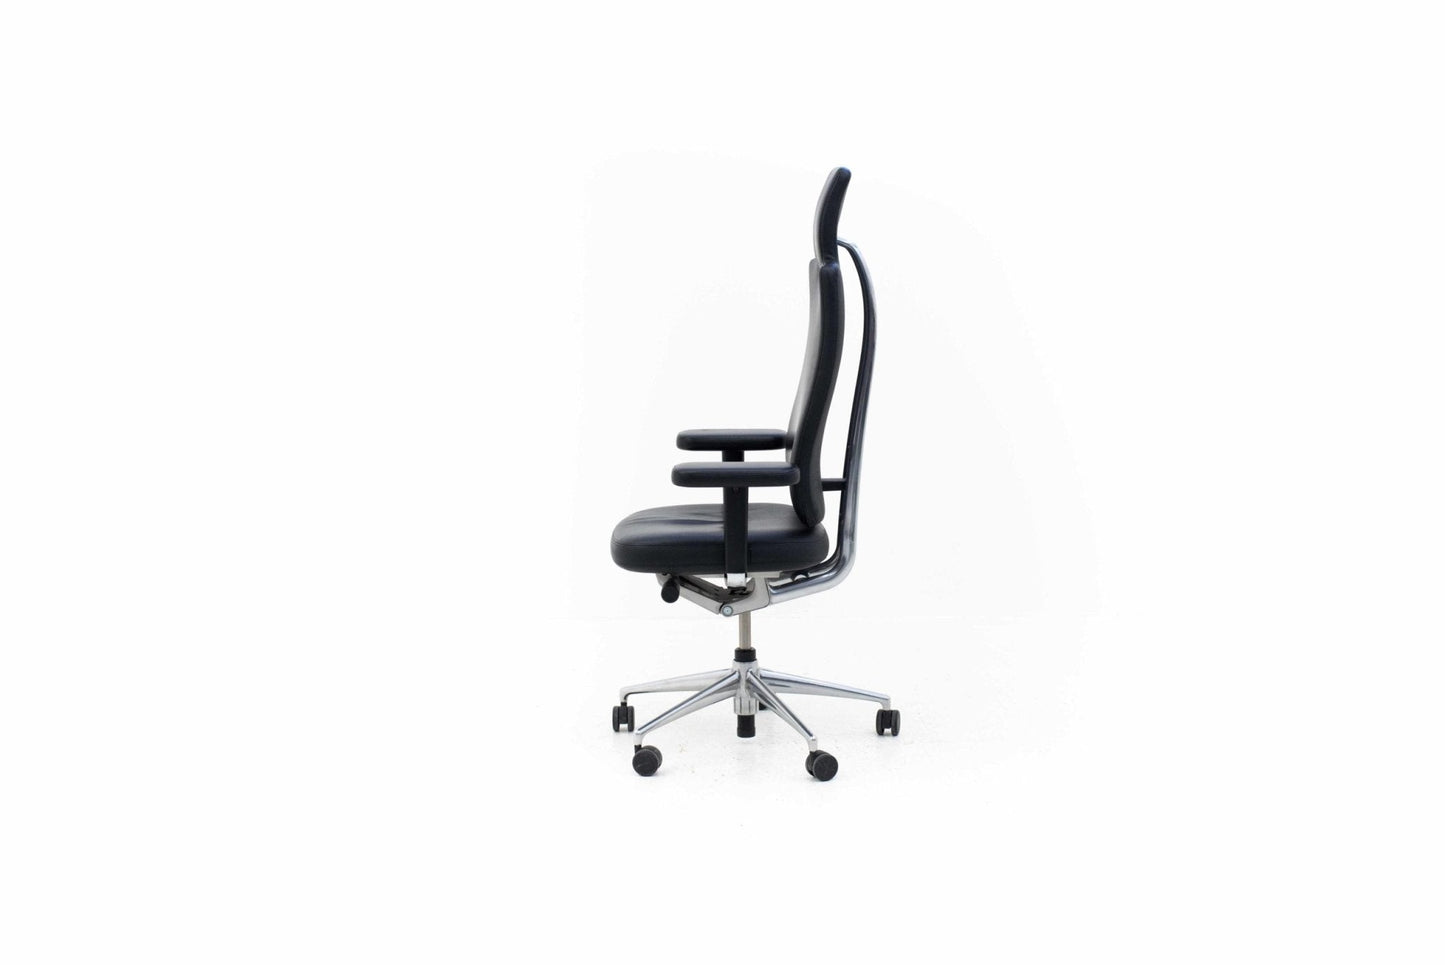 Mario and Claudio Bellini HeadLine office chair from Vitra